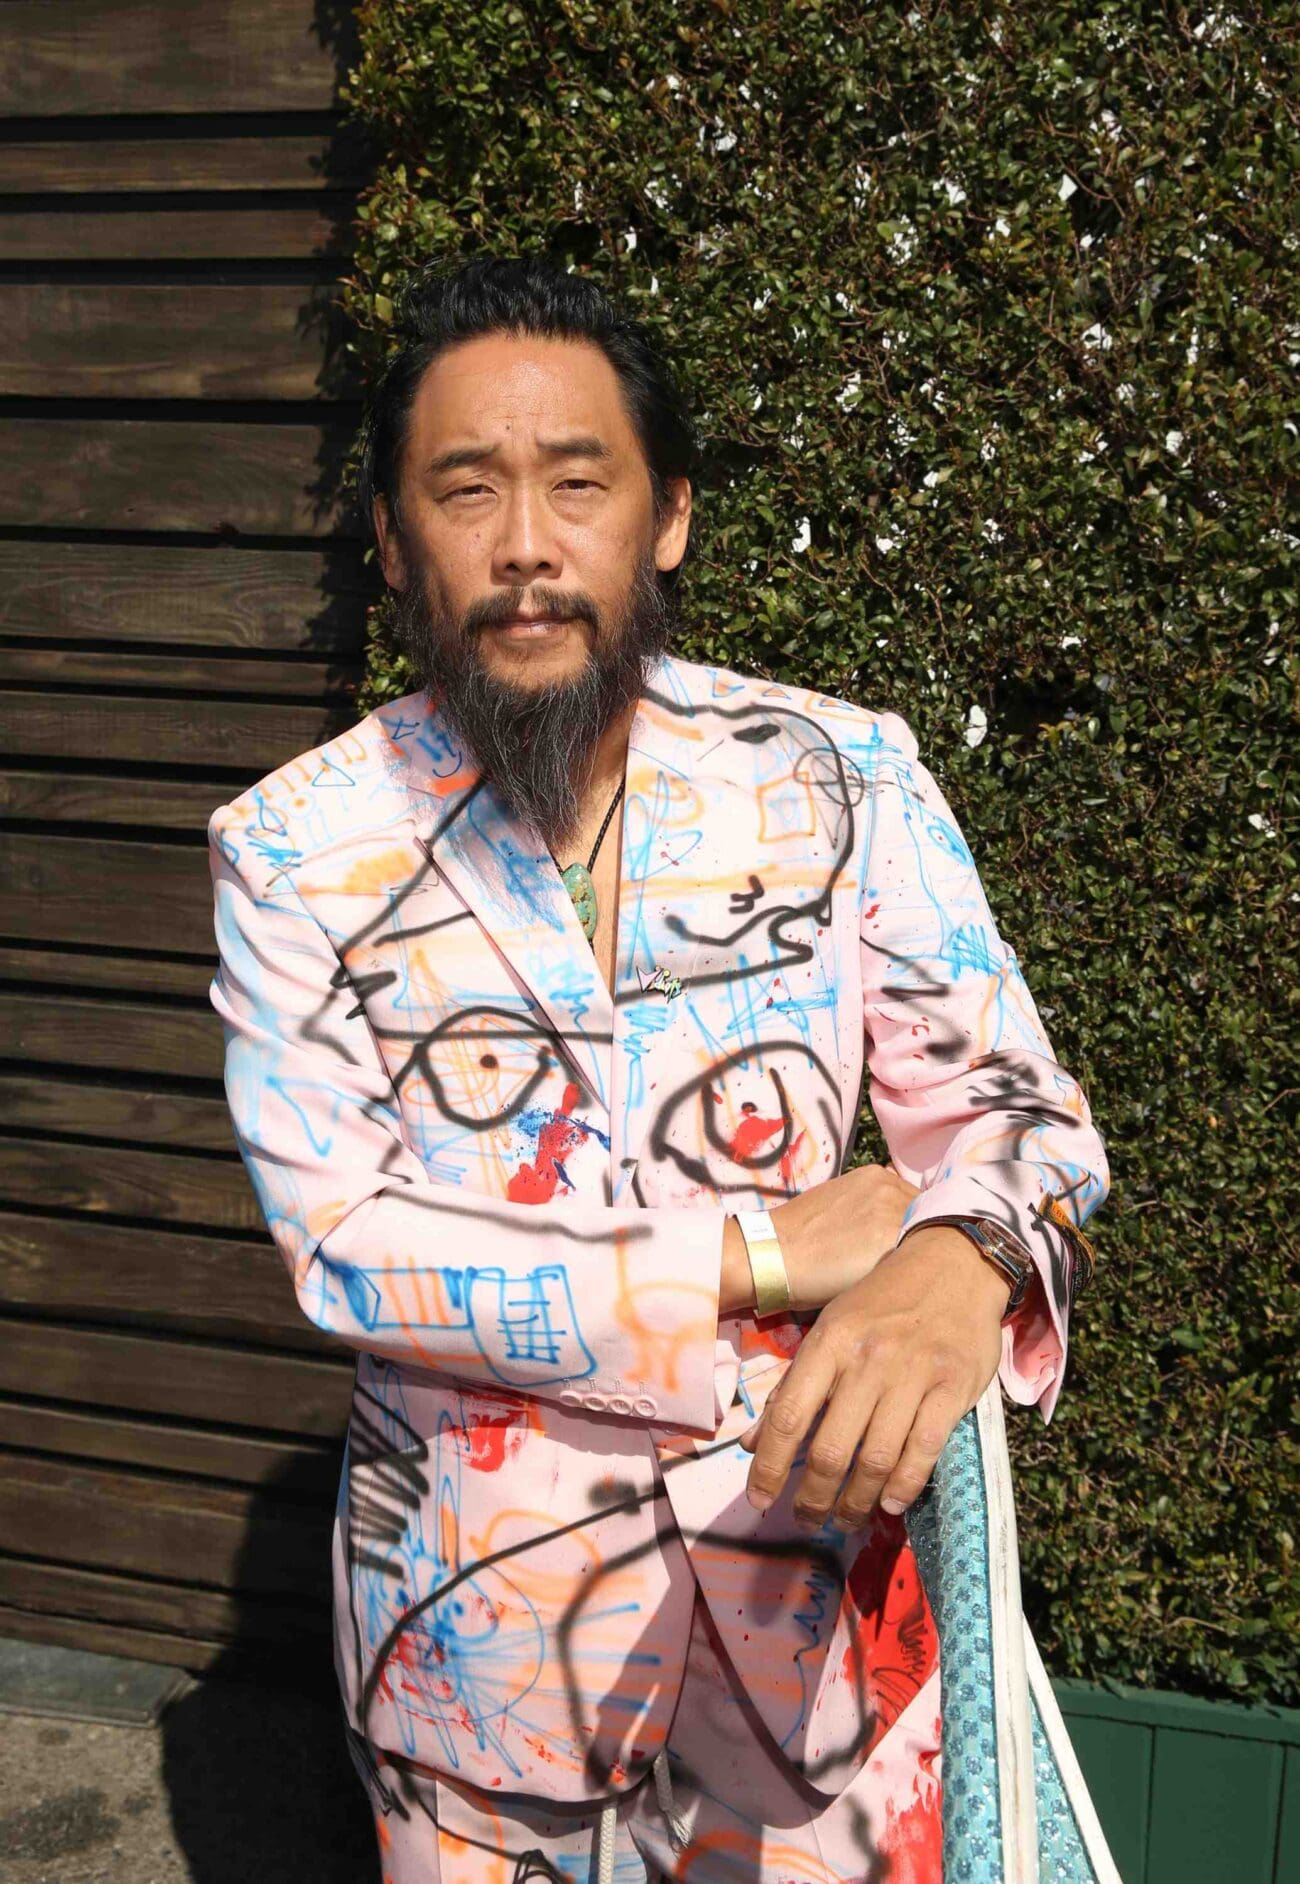 Ride the rollercoaster of David Choe's net worth amid cancel culture shivers. Will this bad-boy artist see redemption or rue? It's art's biggest cliffhanger yet.